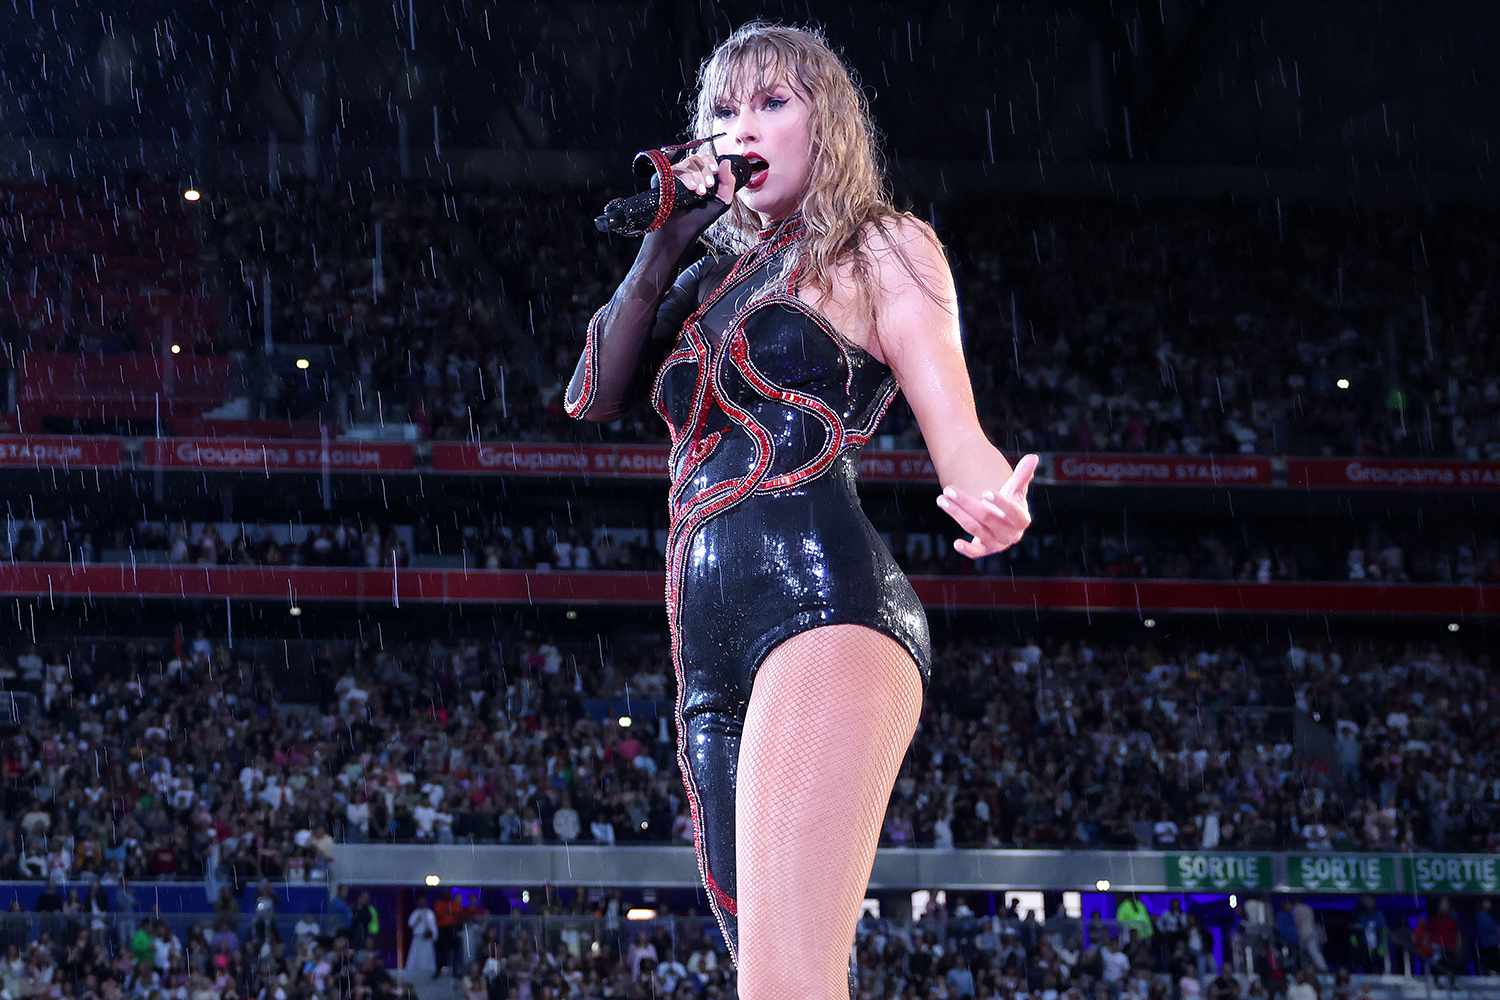 Taylor Swift Calls Fans 'Champions and Heroes' for 'Wildly' Dancing in the Rain at French Show